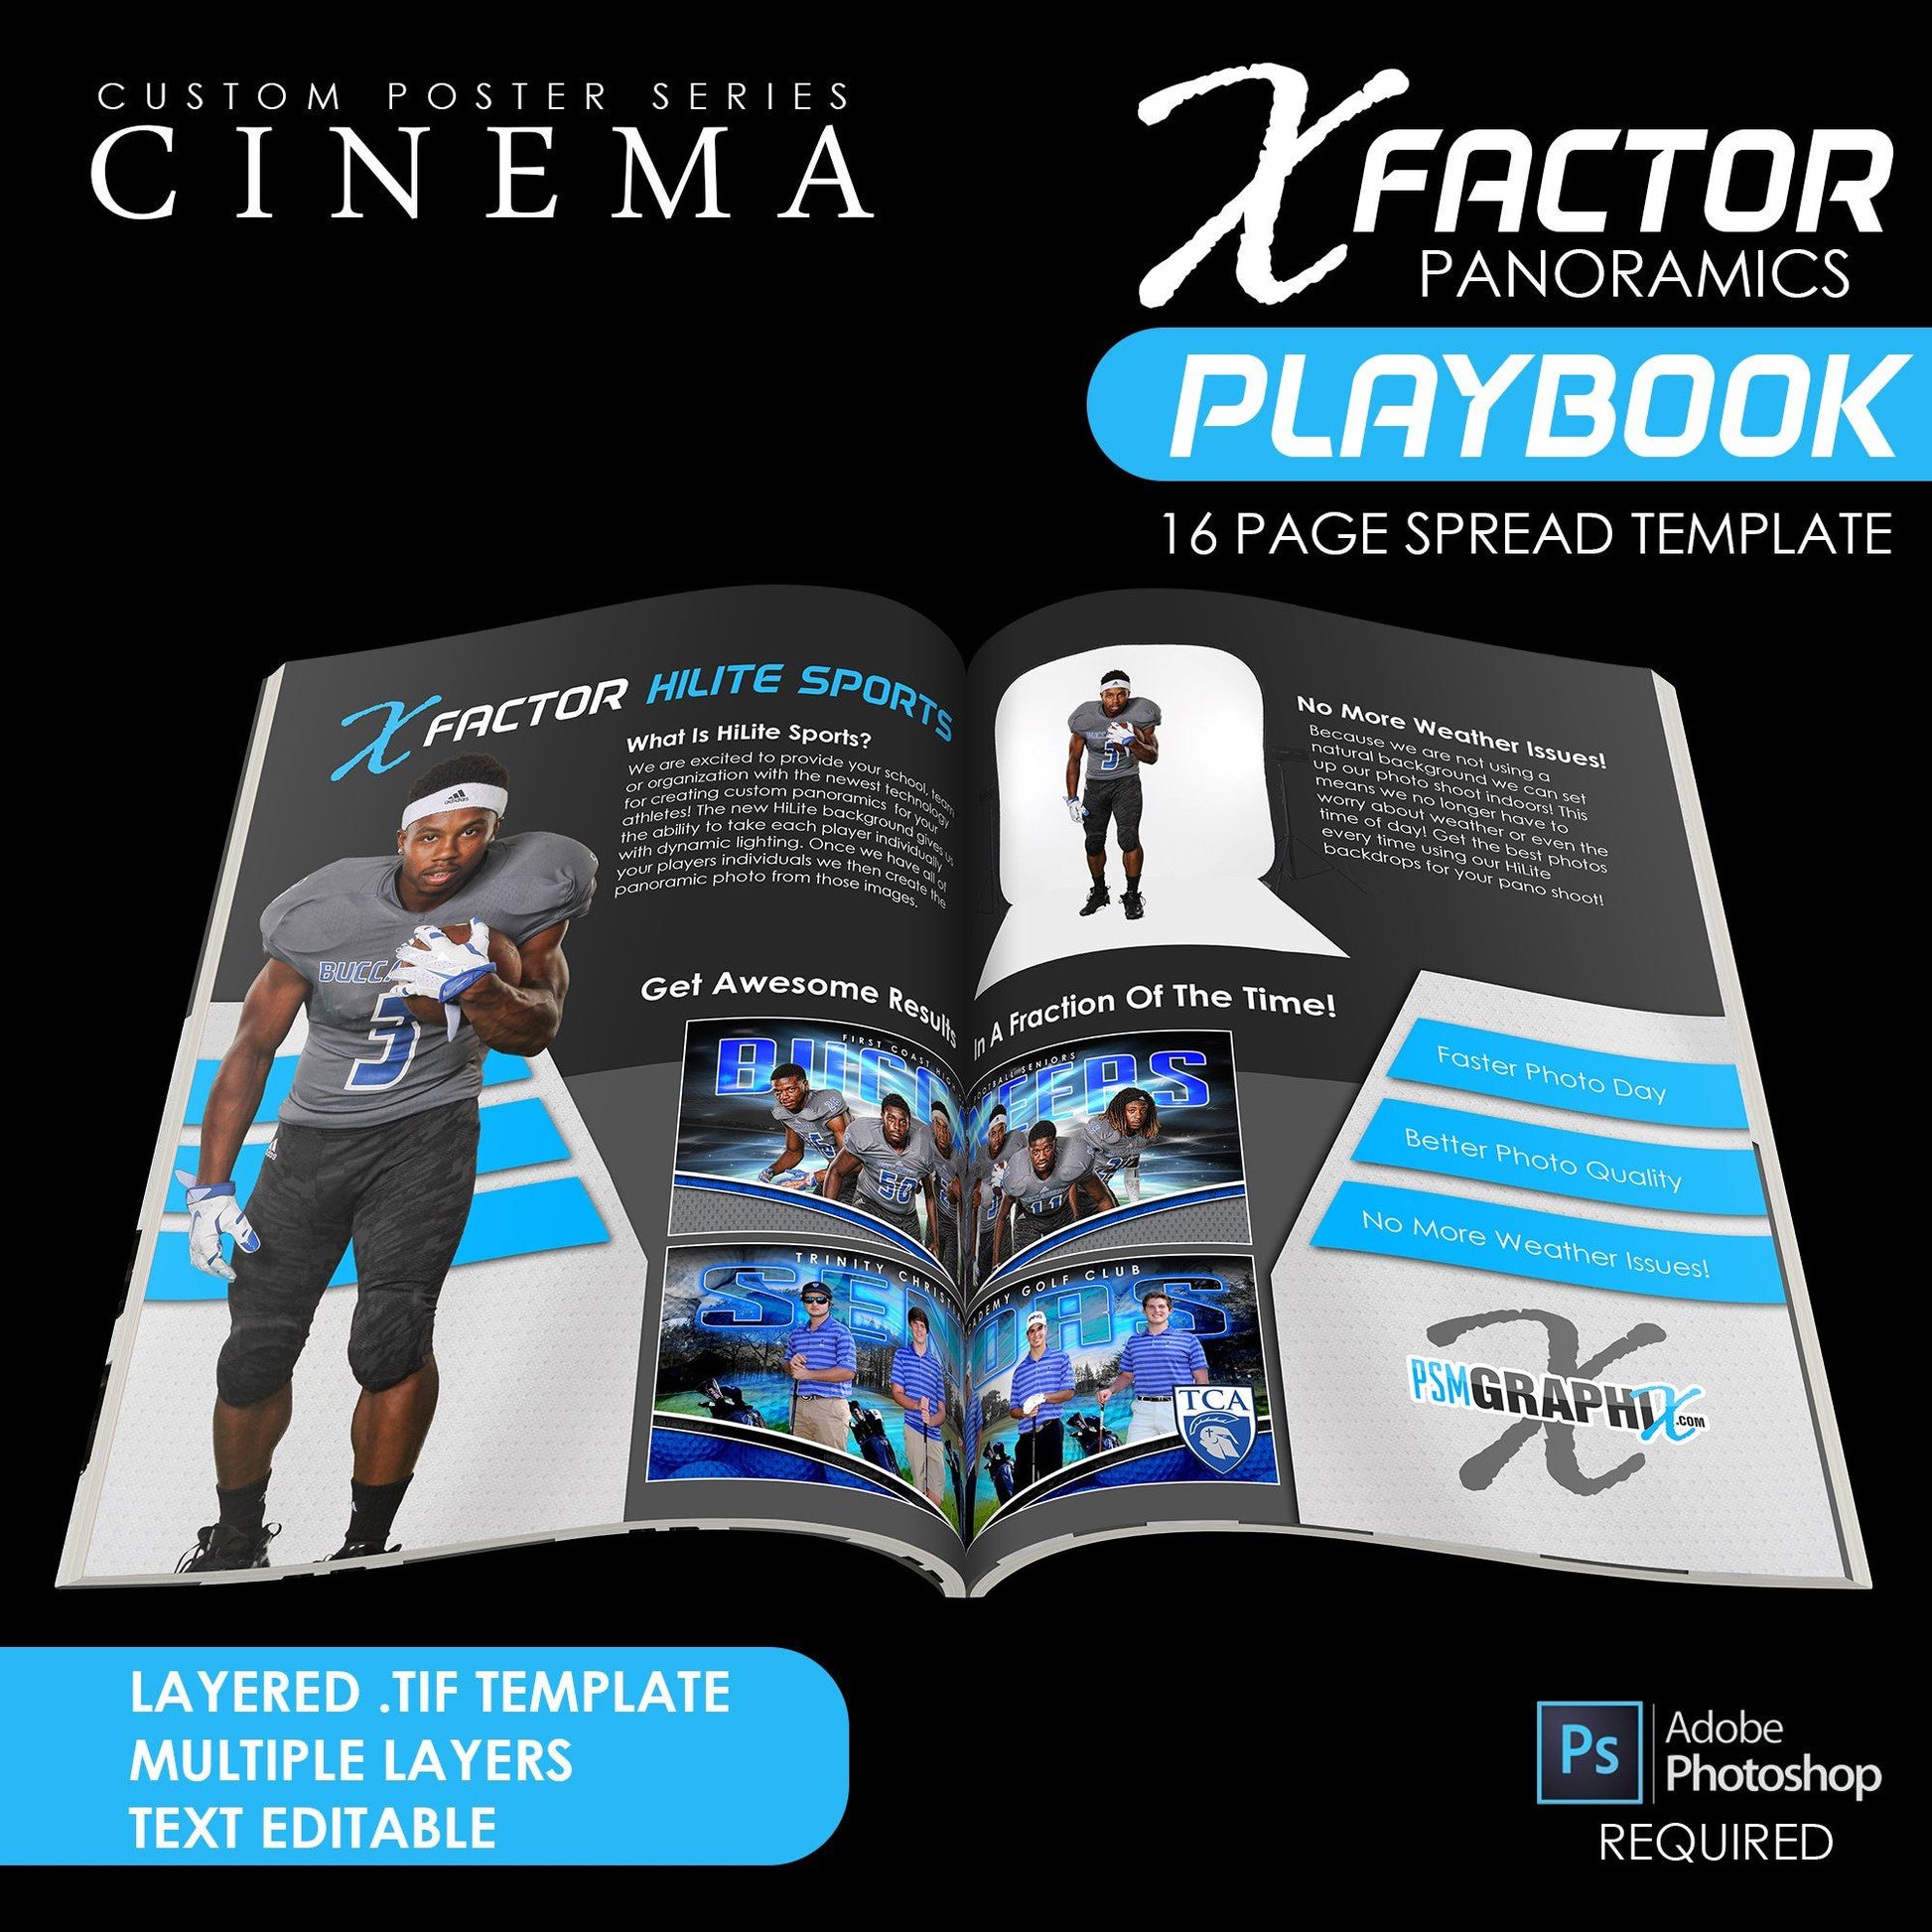 X-Factor - PANORAMIC FULL SET BUNDLE - 2022 Limited Show Special Offer-Photoshop Template - PSMGraphix